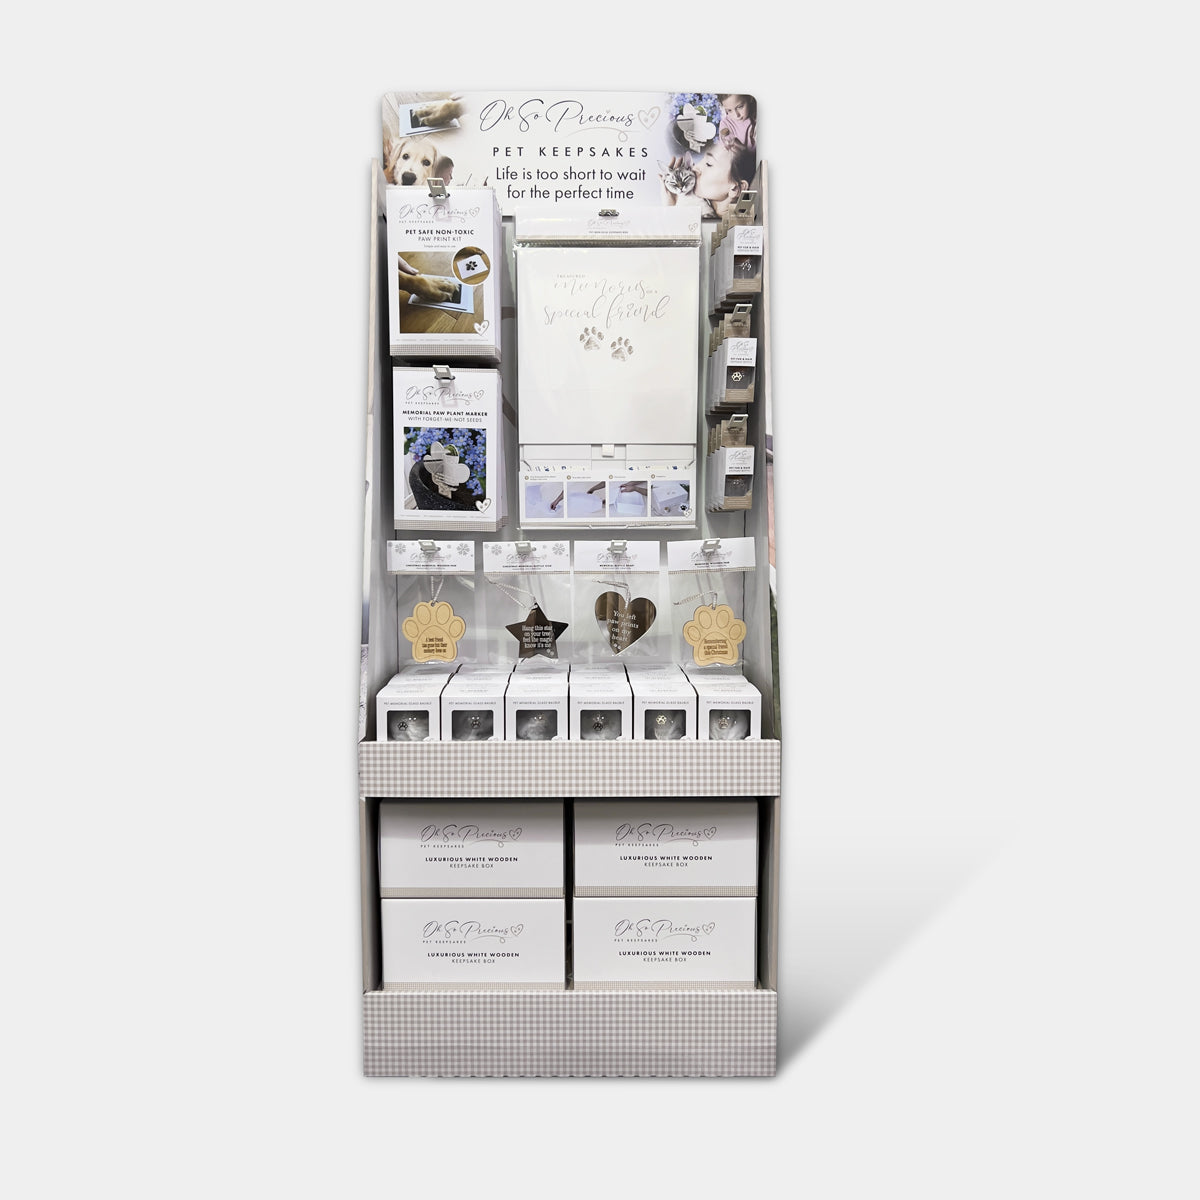 Fully Stocked Floor Standing Product Display Unit